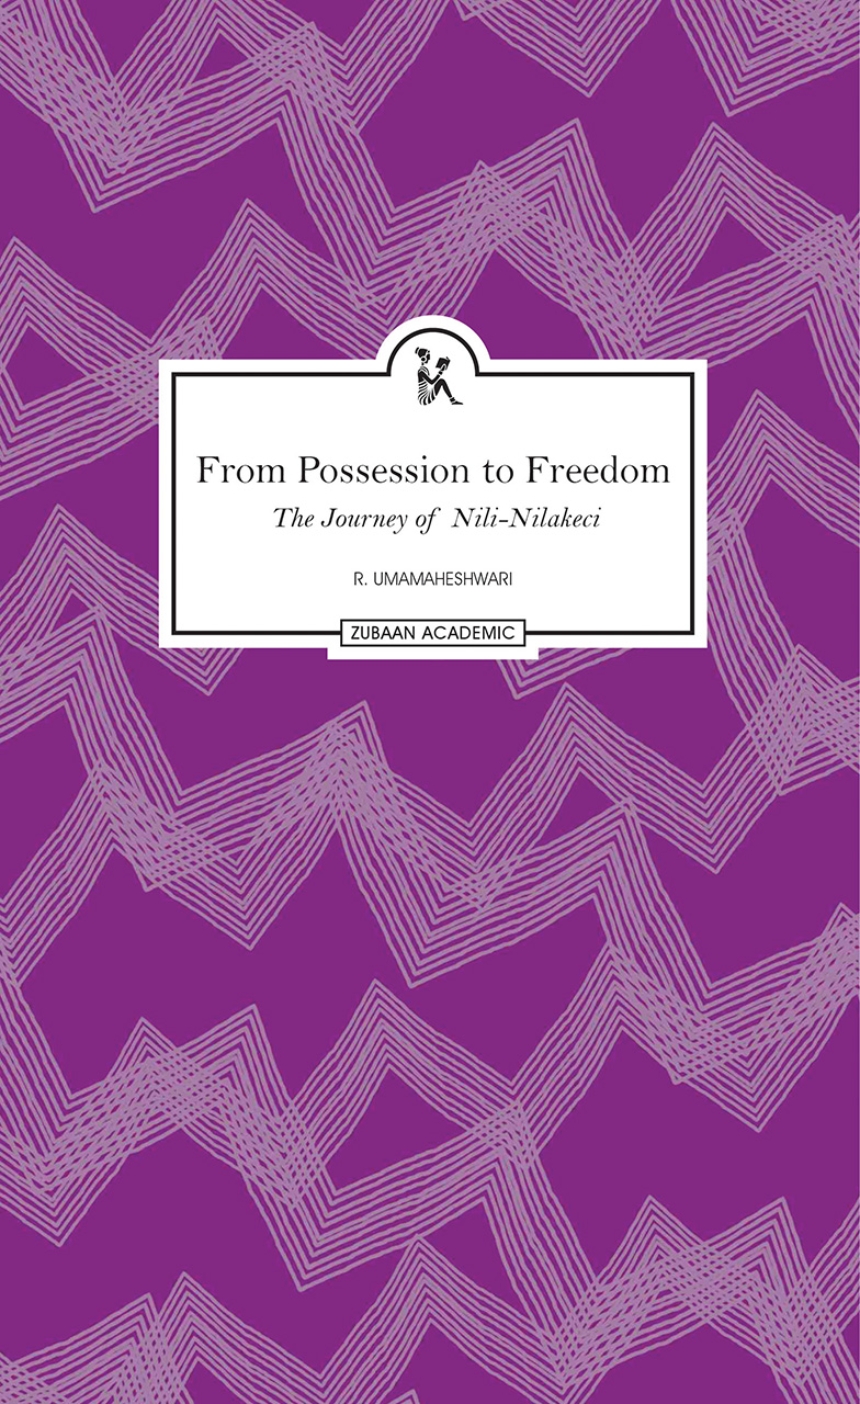 From Possession to Freedom